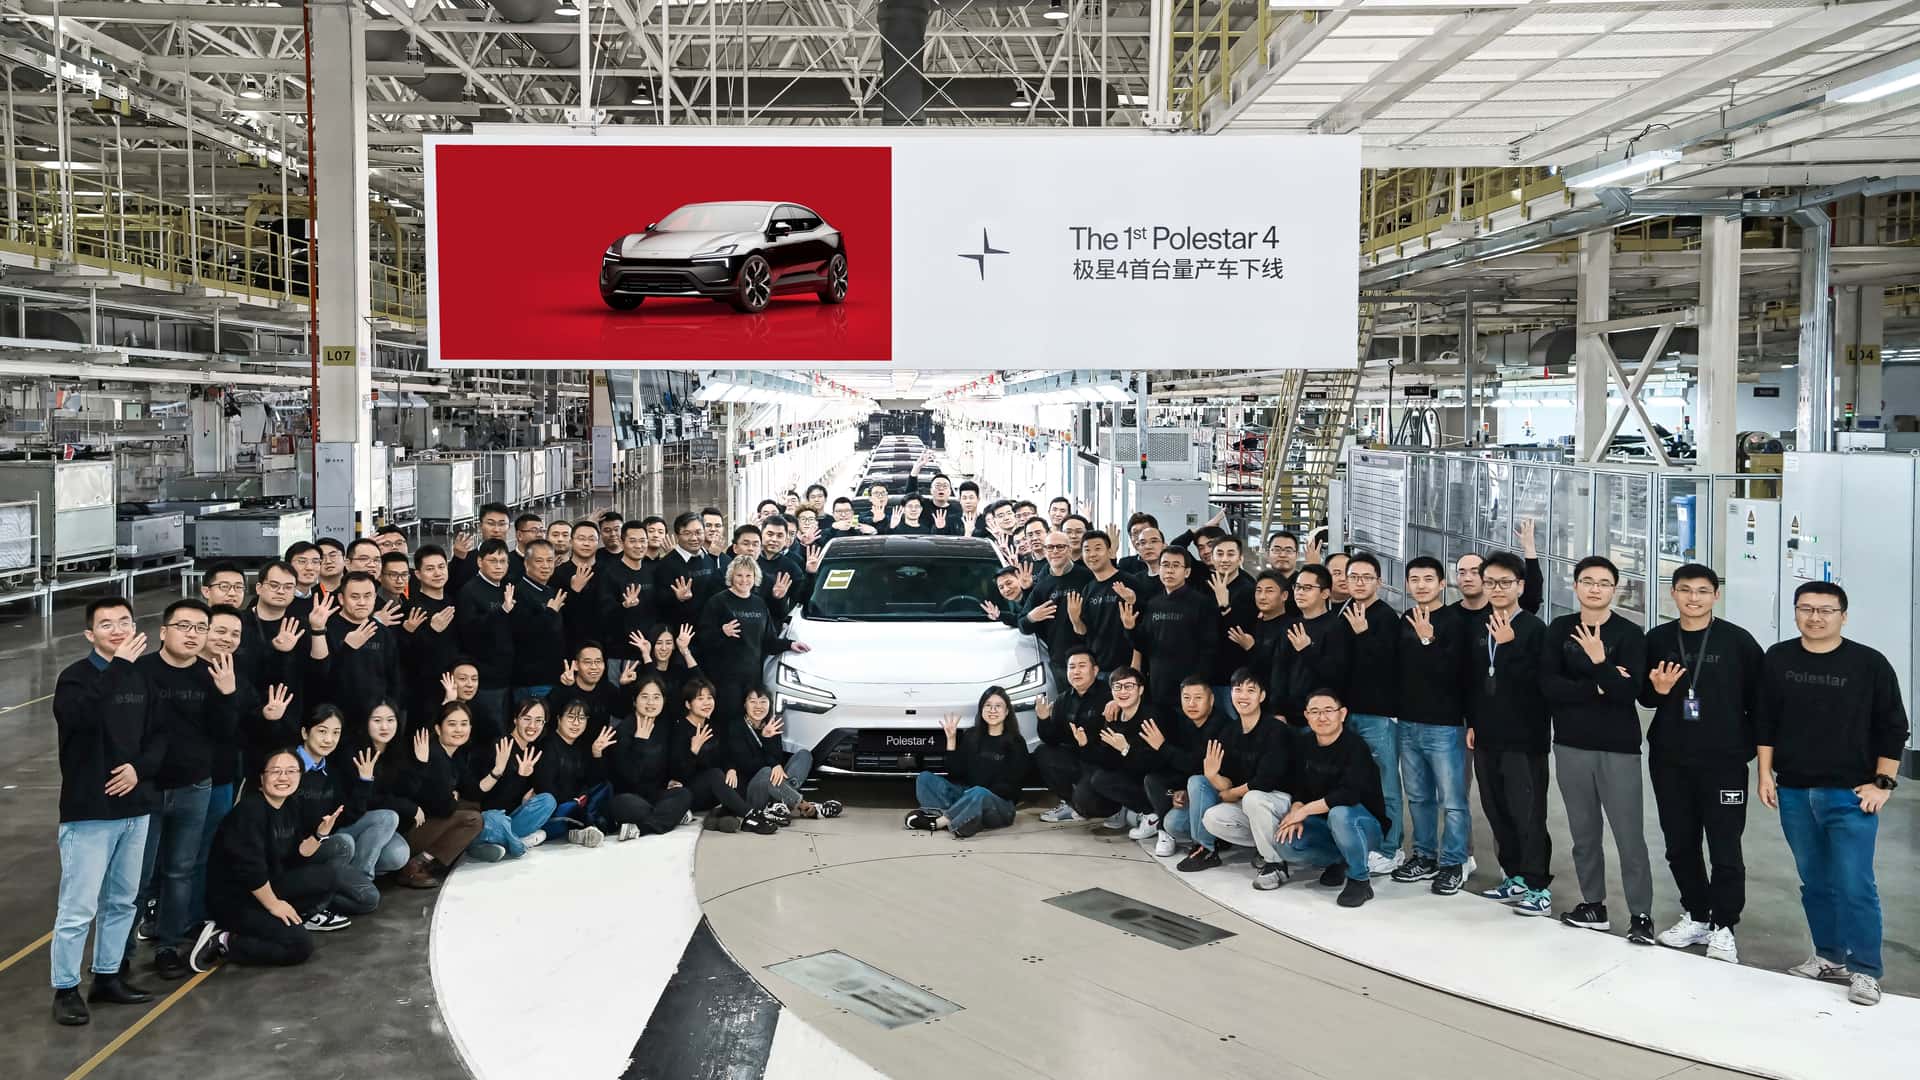 polestar 4 production starts in china, international sales in 2024